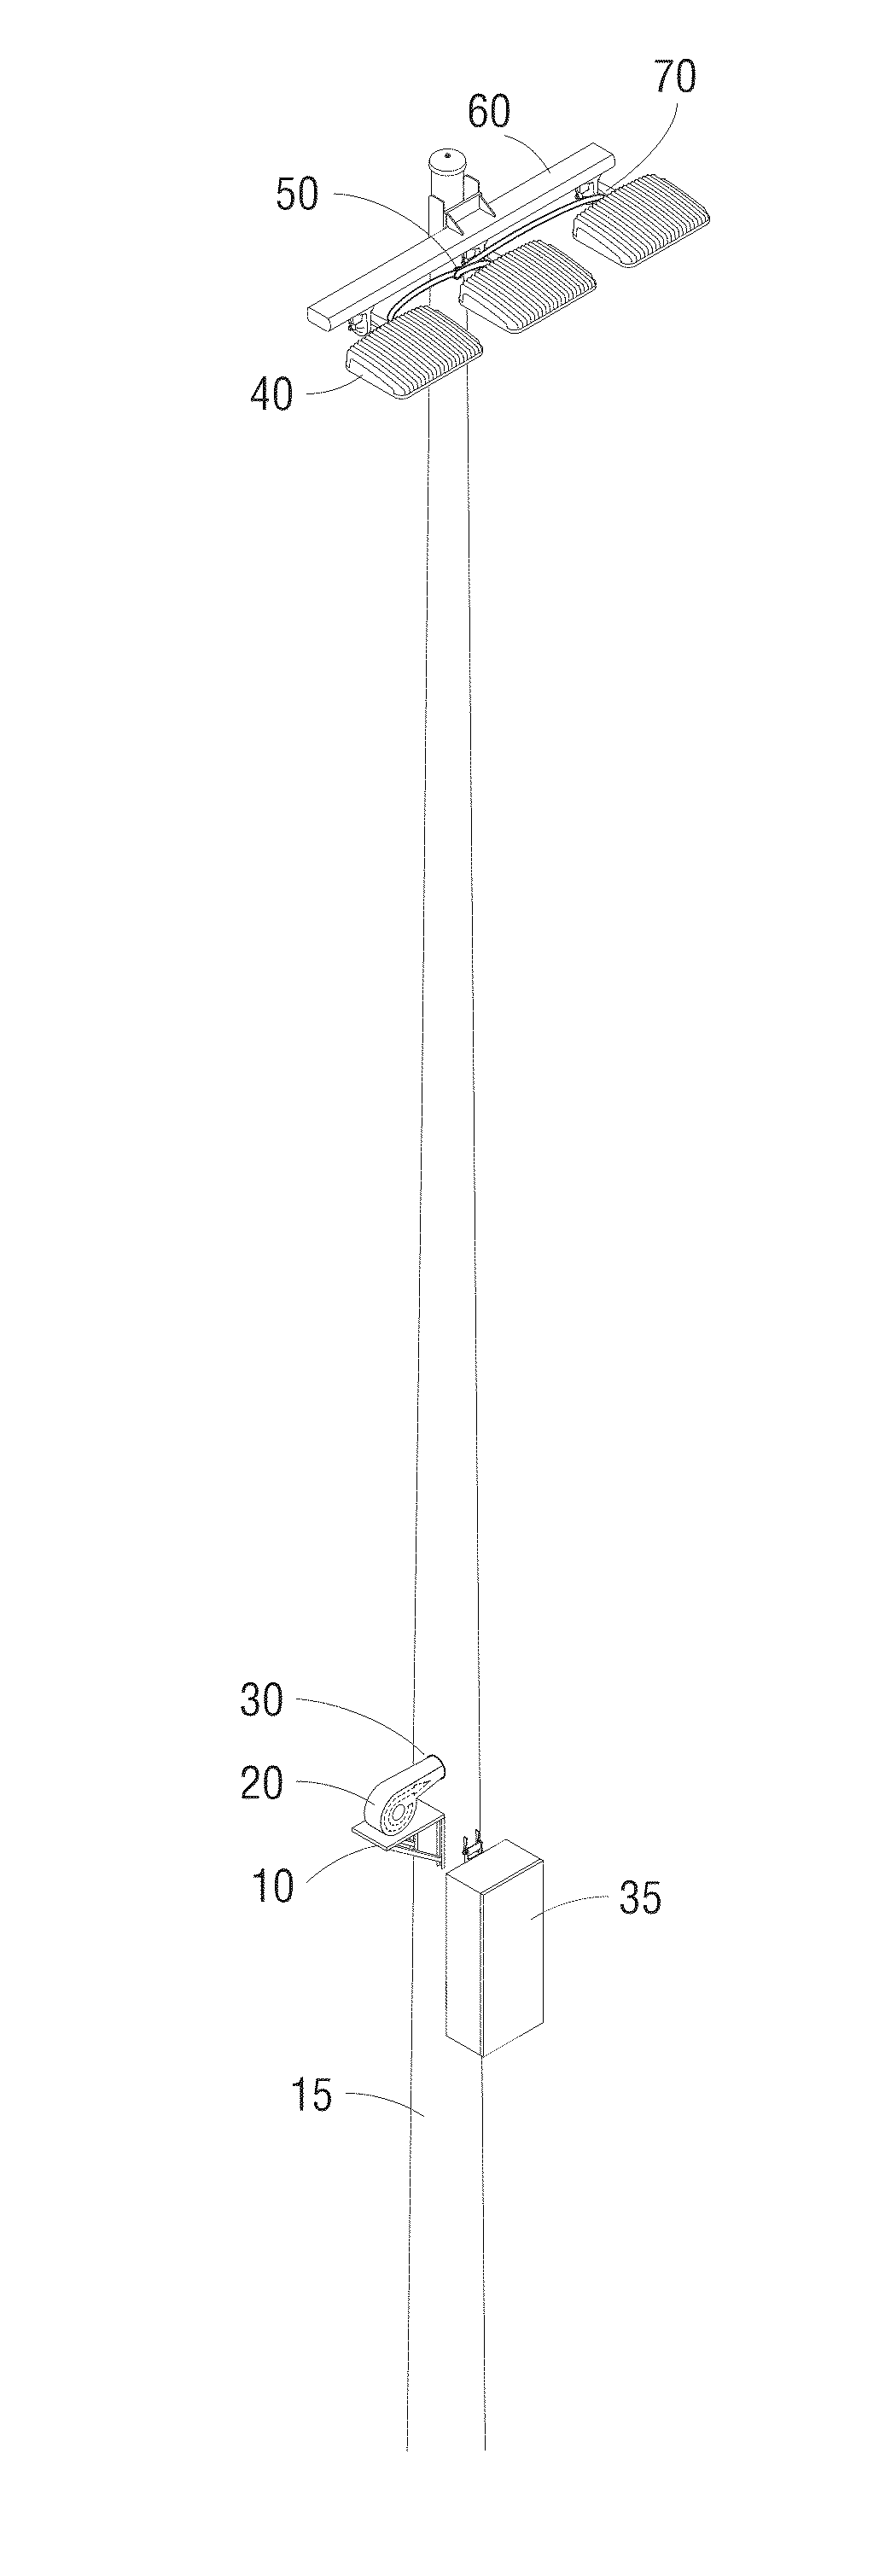 Apparatus, method, and system for lighting fixture cooling